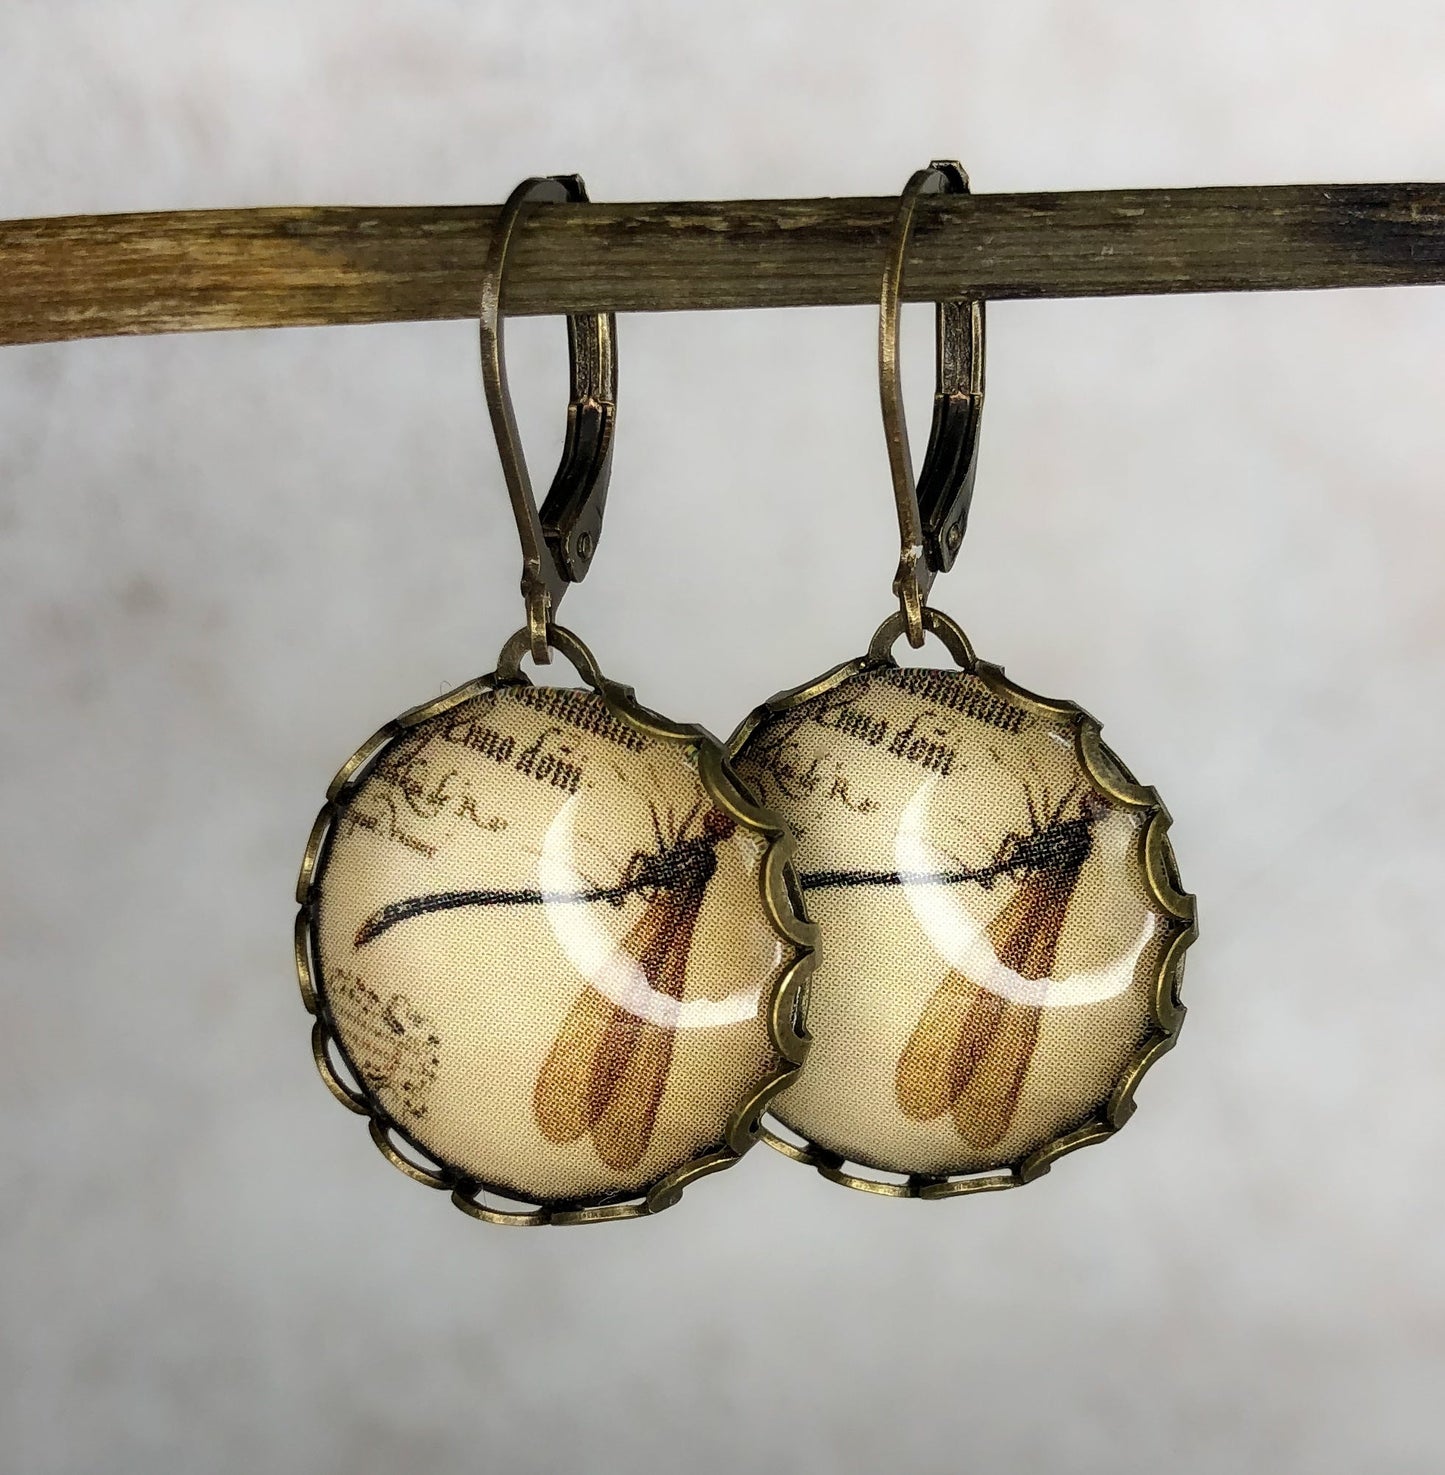 Natural researcher earrings in vintage style